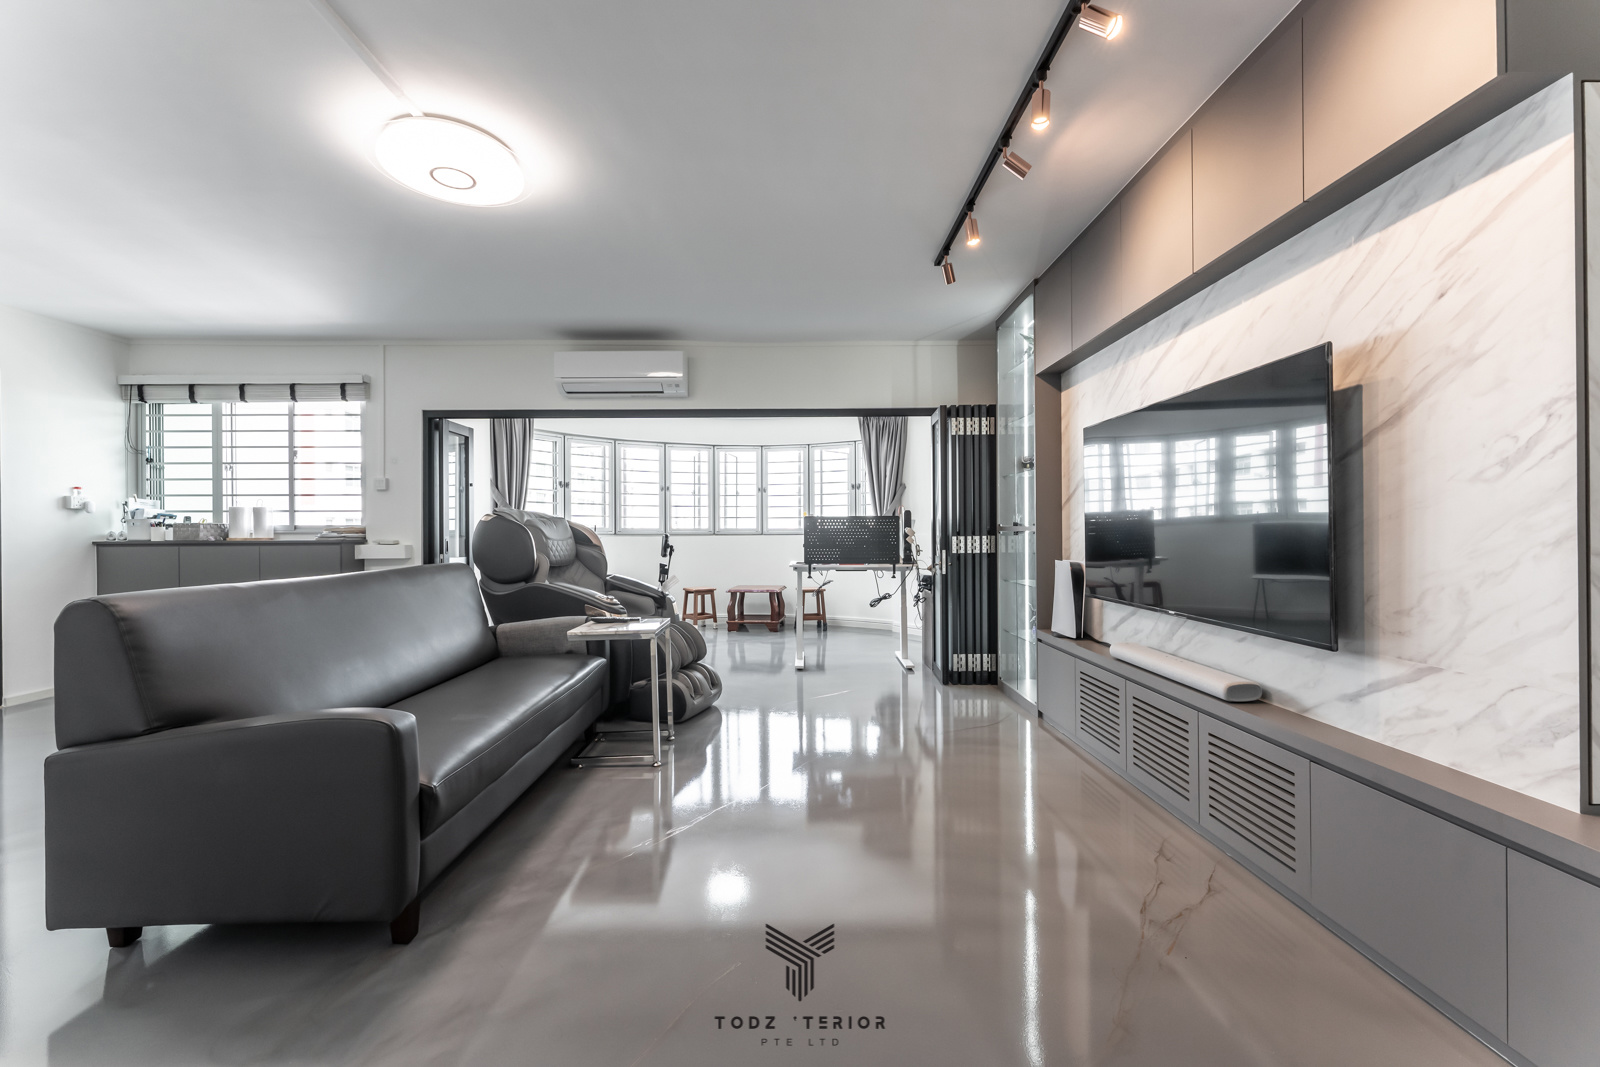 405 Sin Ming Ave - 1292sqft by Todz’ Terior Pte Ltd. Unit is HDB and follows a  style.